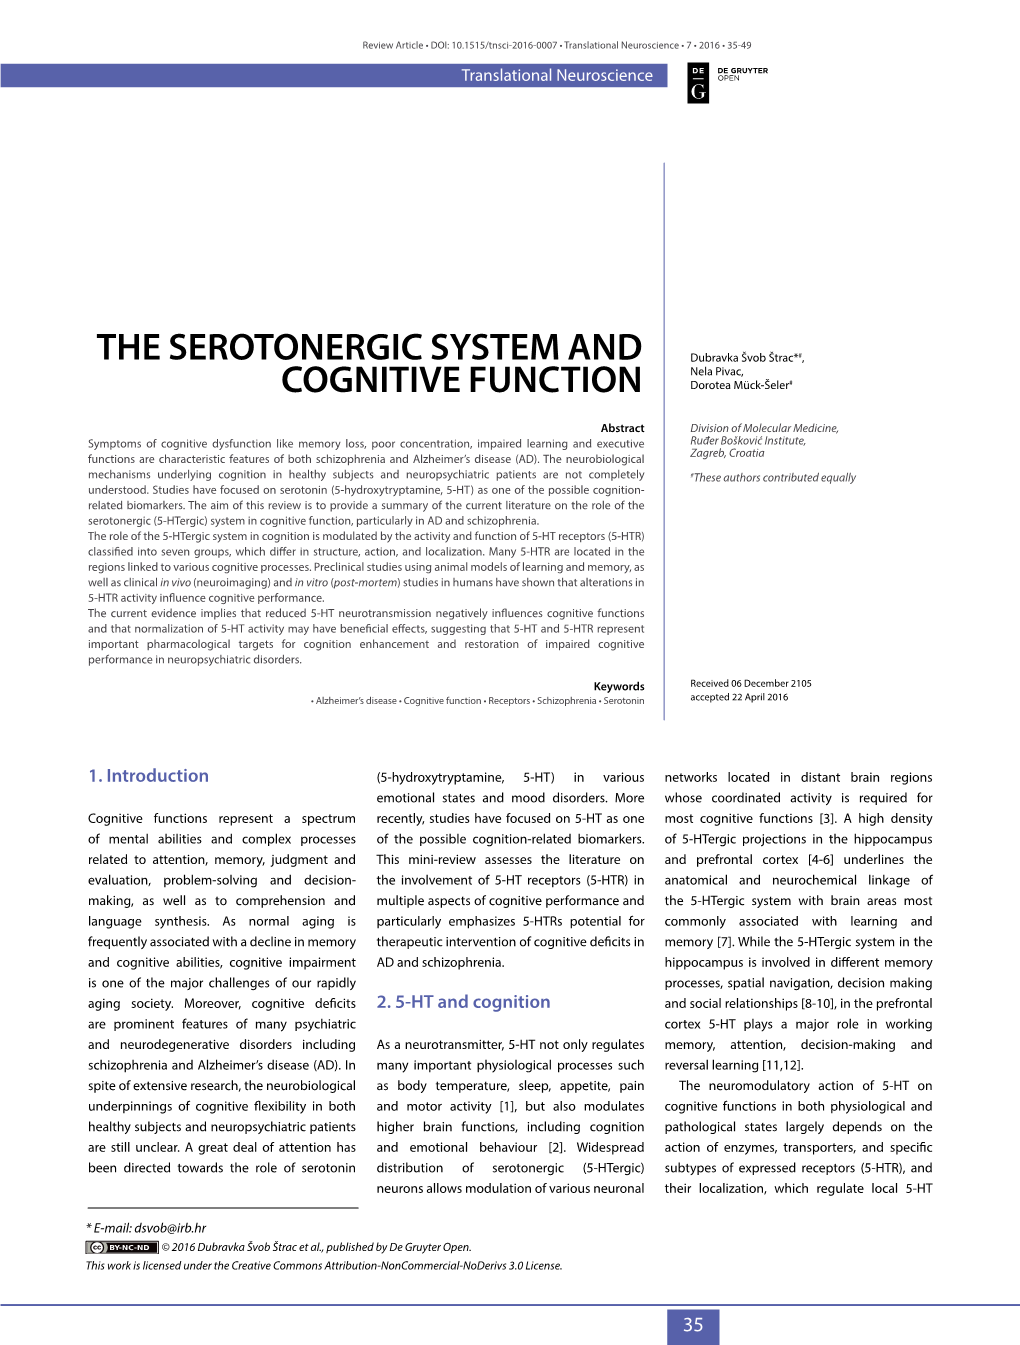 The Serotonergic System and Cognitive Function